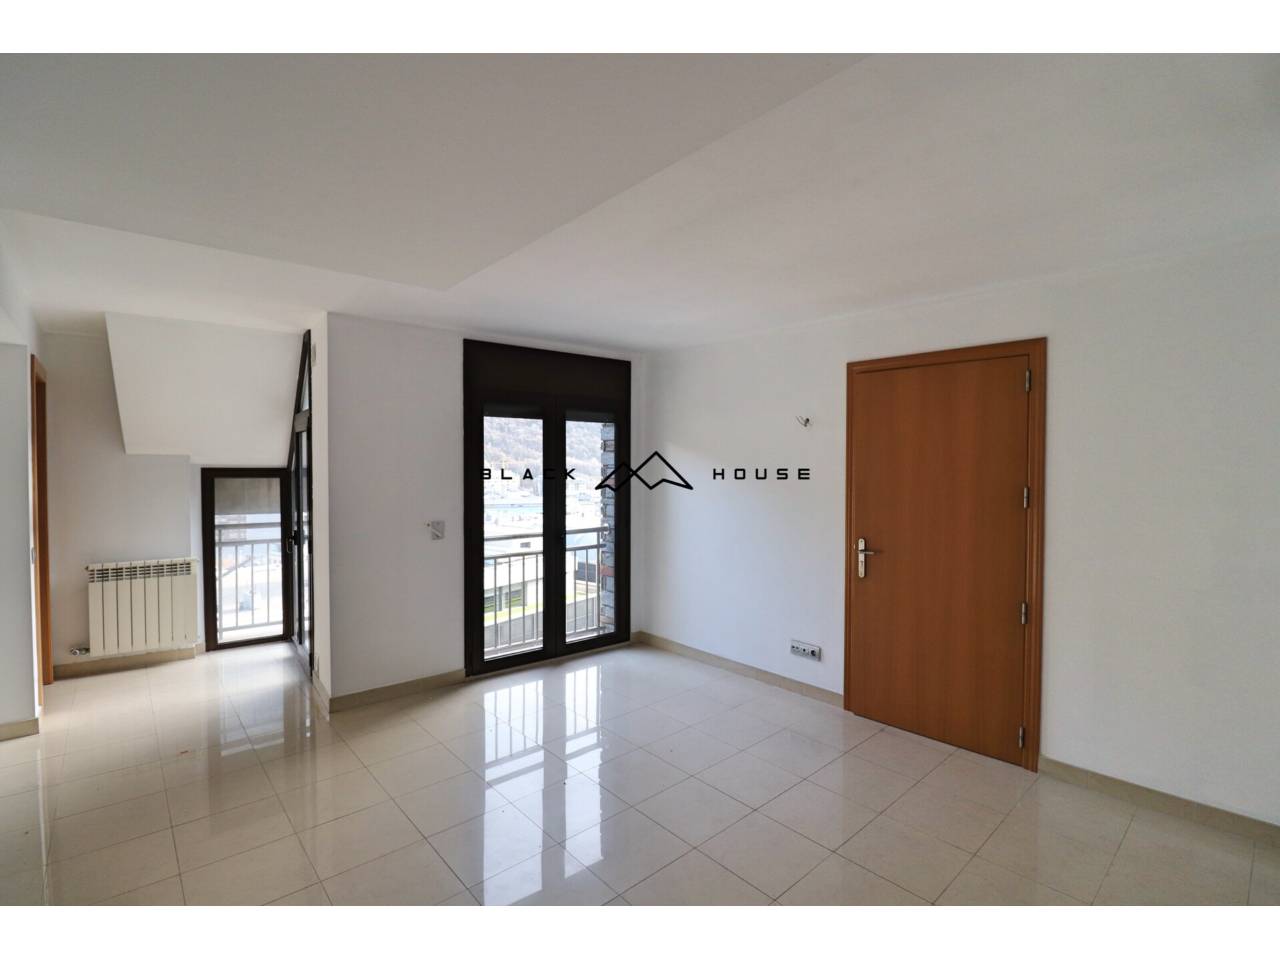 Office for rent in Escaldes-Engordany, next to all services and shops.